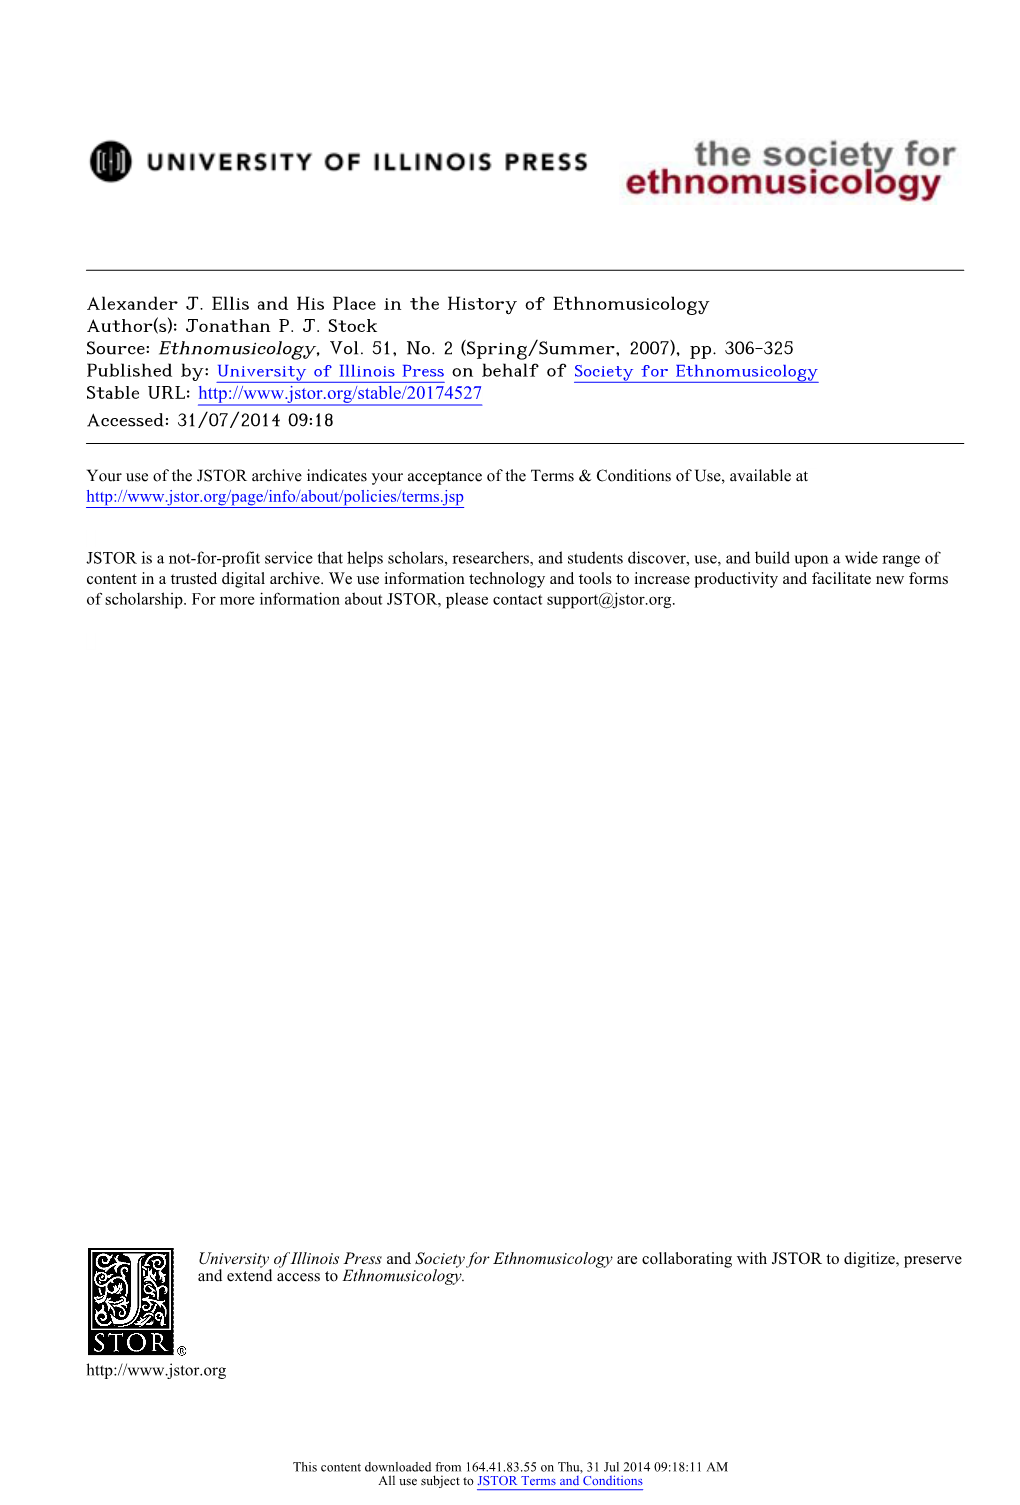 Alexander J. Ellis and His Place in the History of Ethnomusicology Author(S): Jonathan P